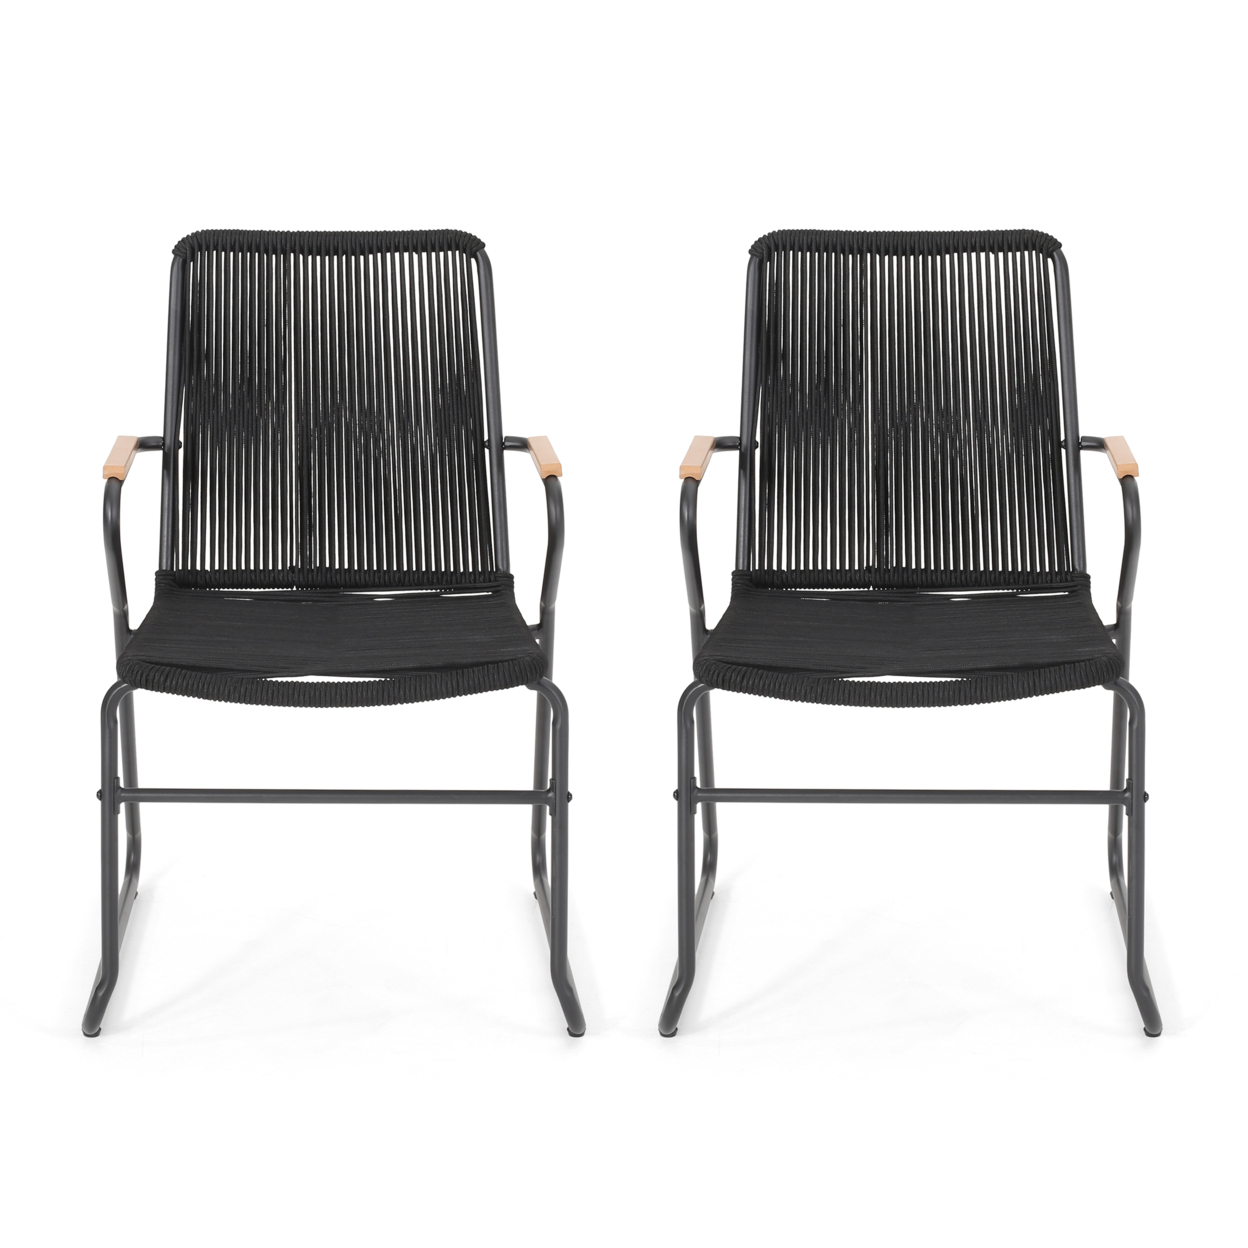 Luca Modern Outdoor Rope Weave Club Chair (Set Of 2)